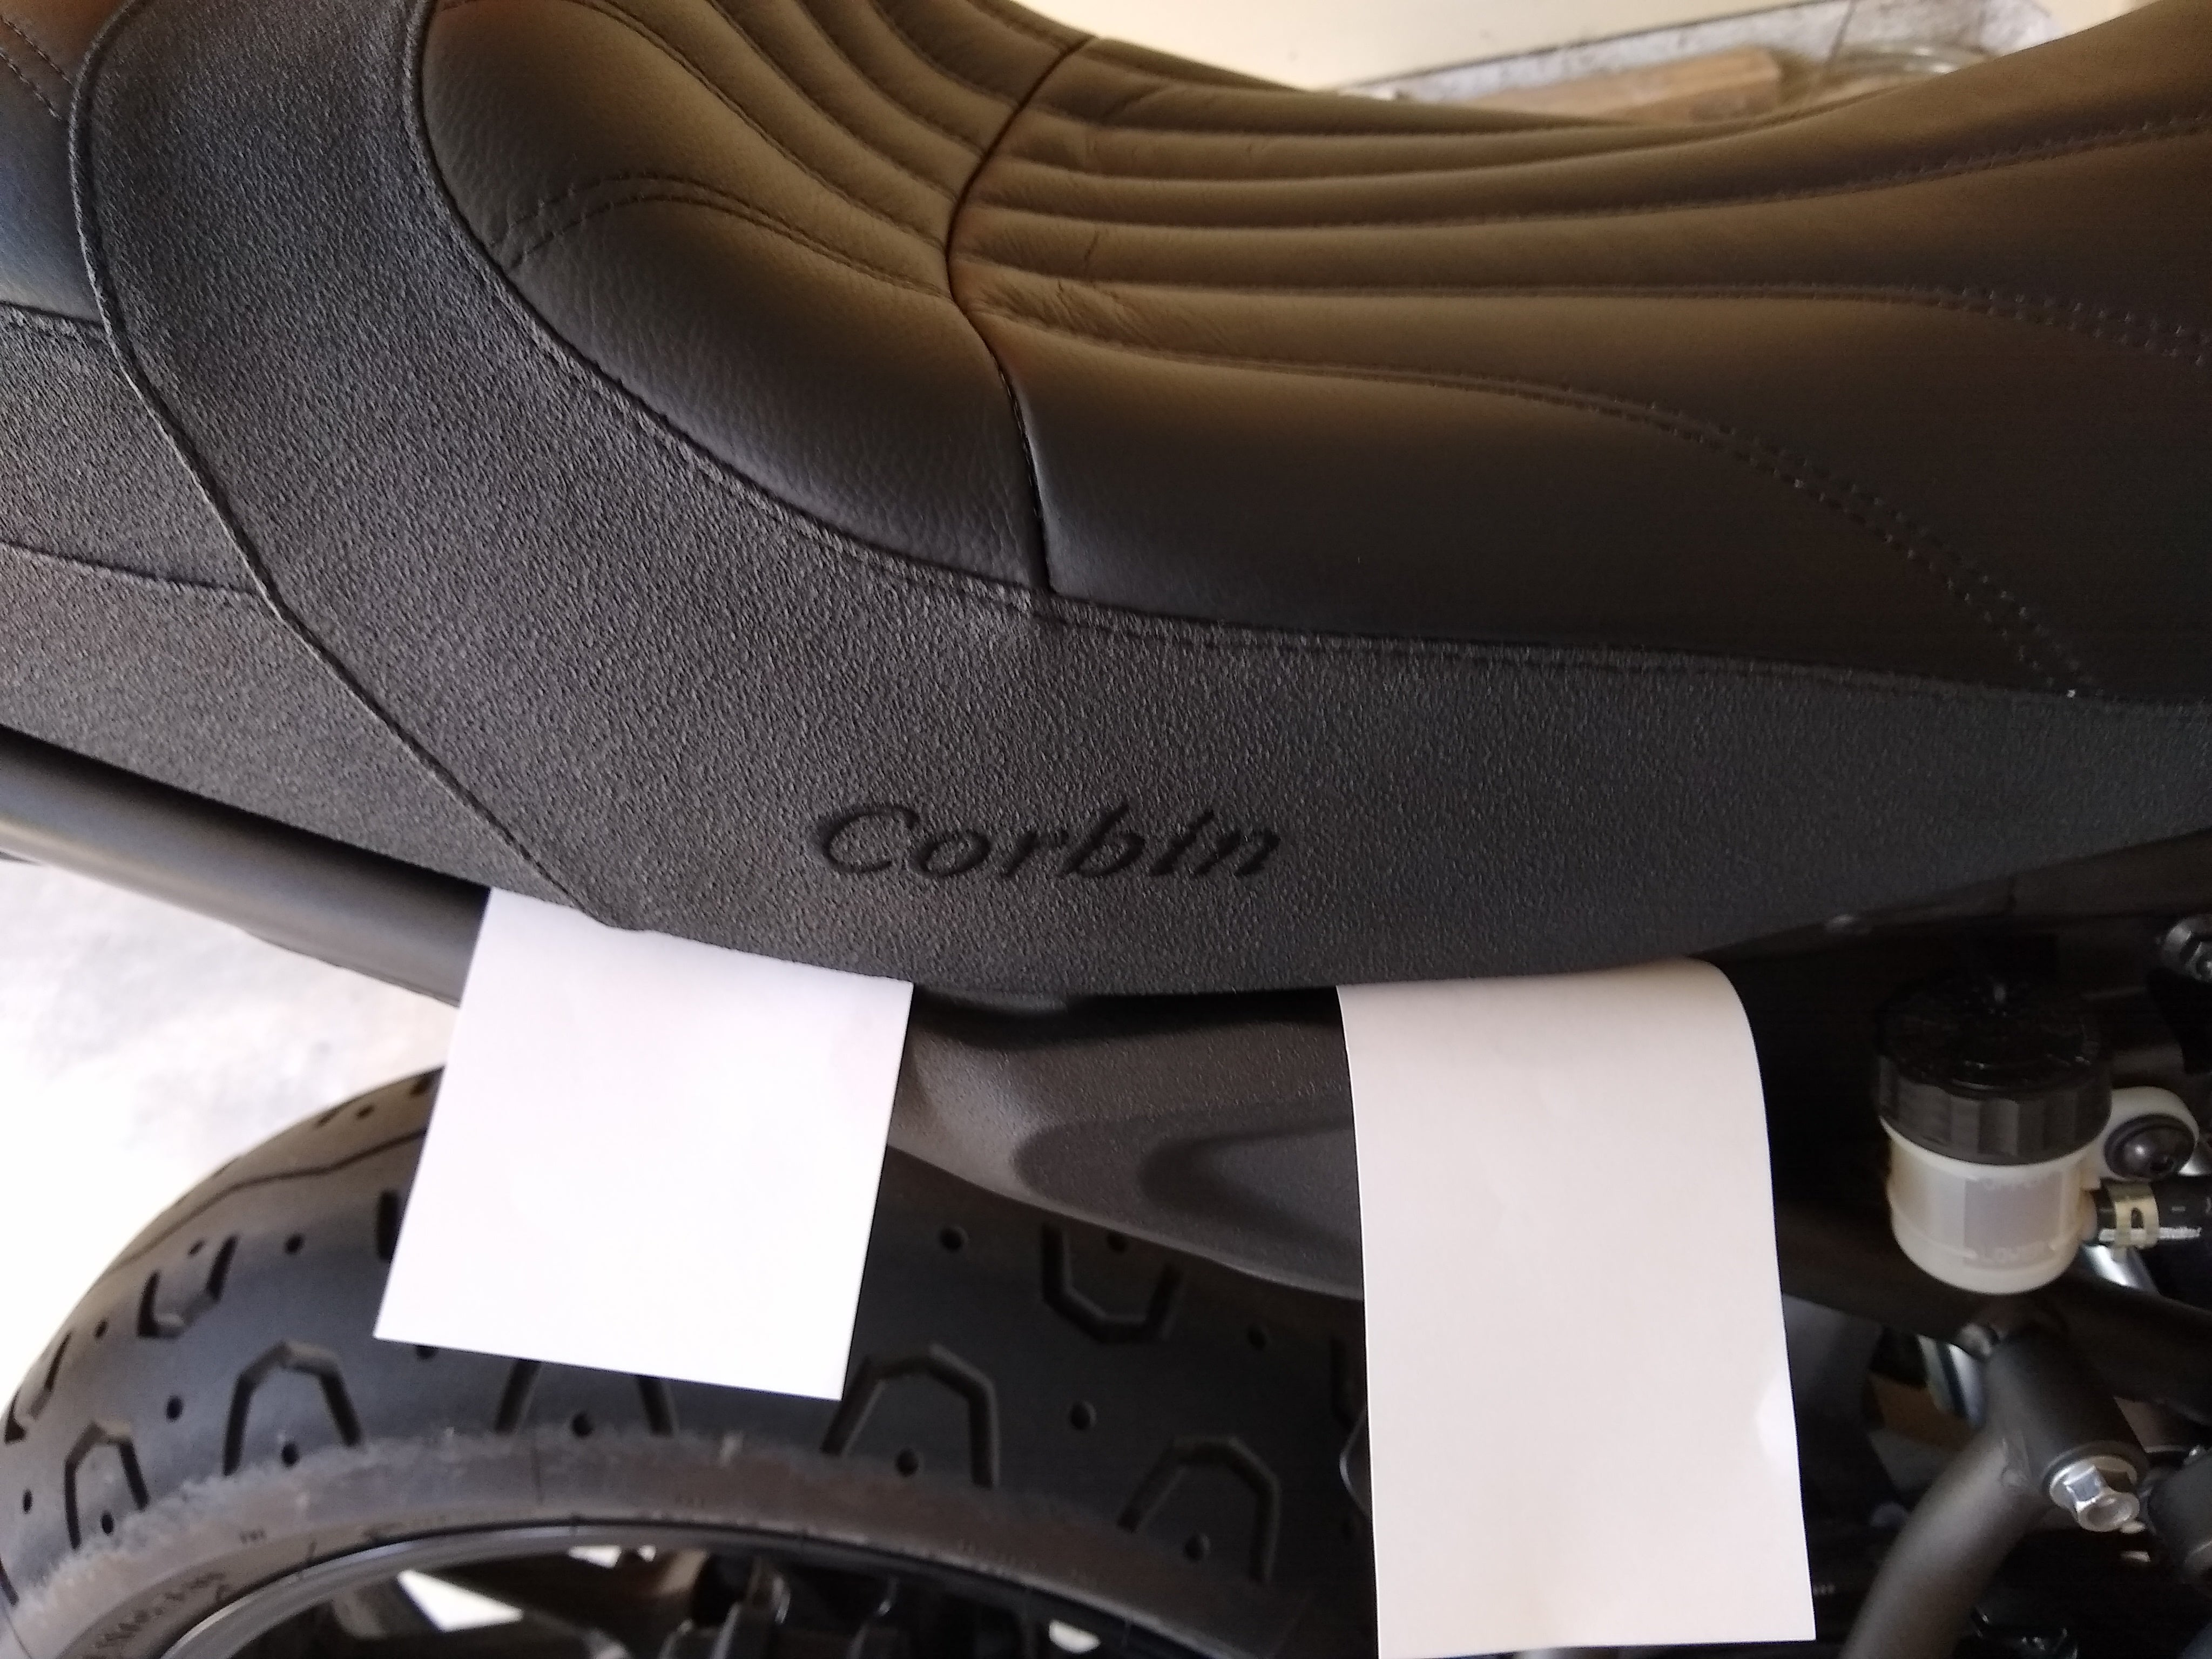 Review Corbin Fighter Lady Seat Xsr 700 Forums